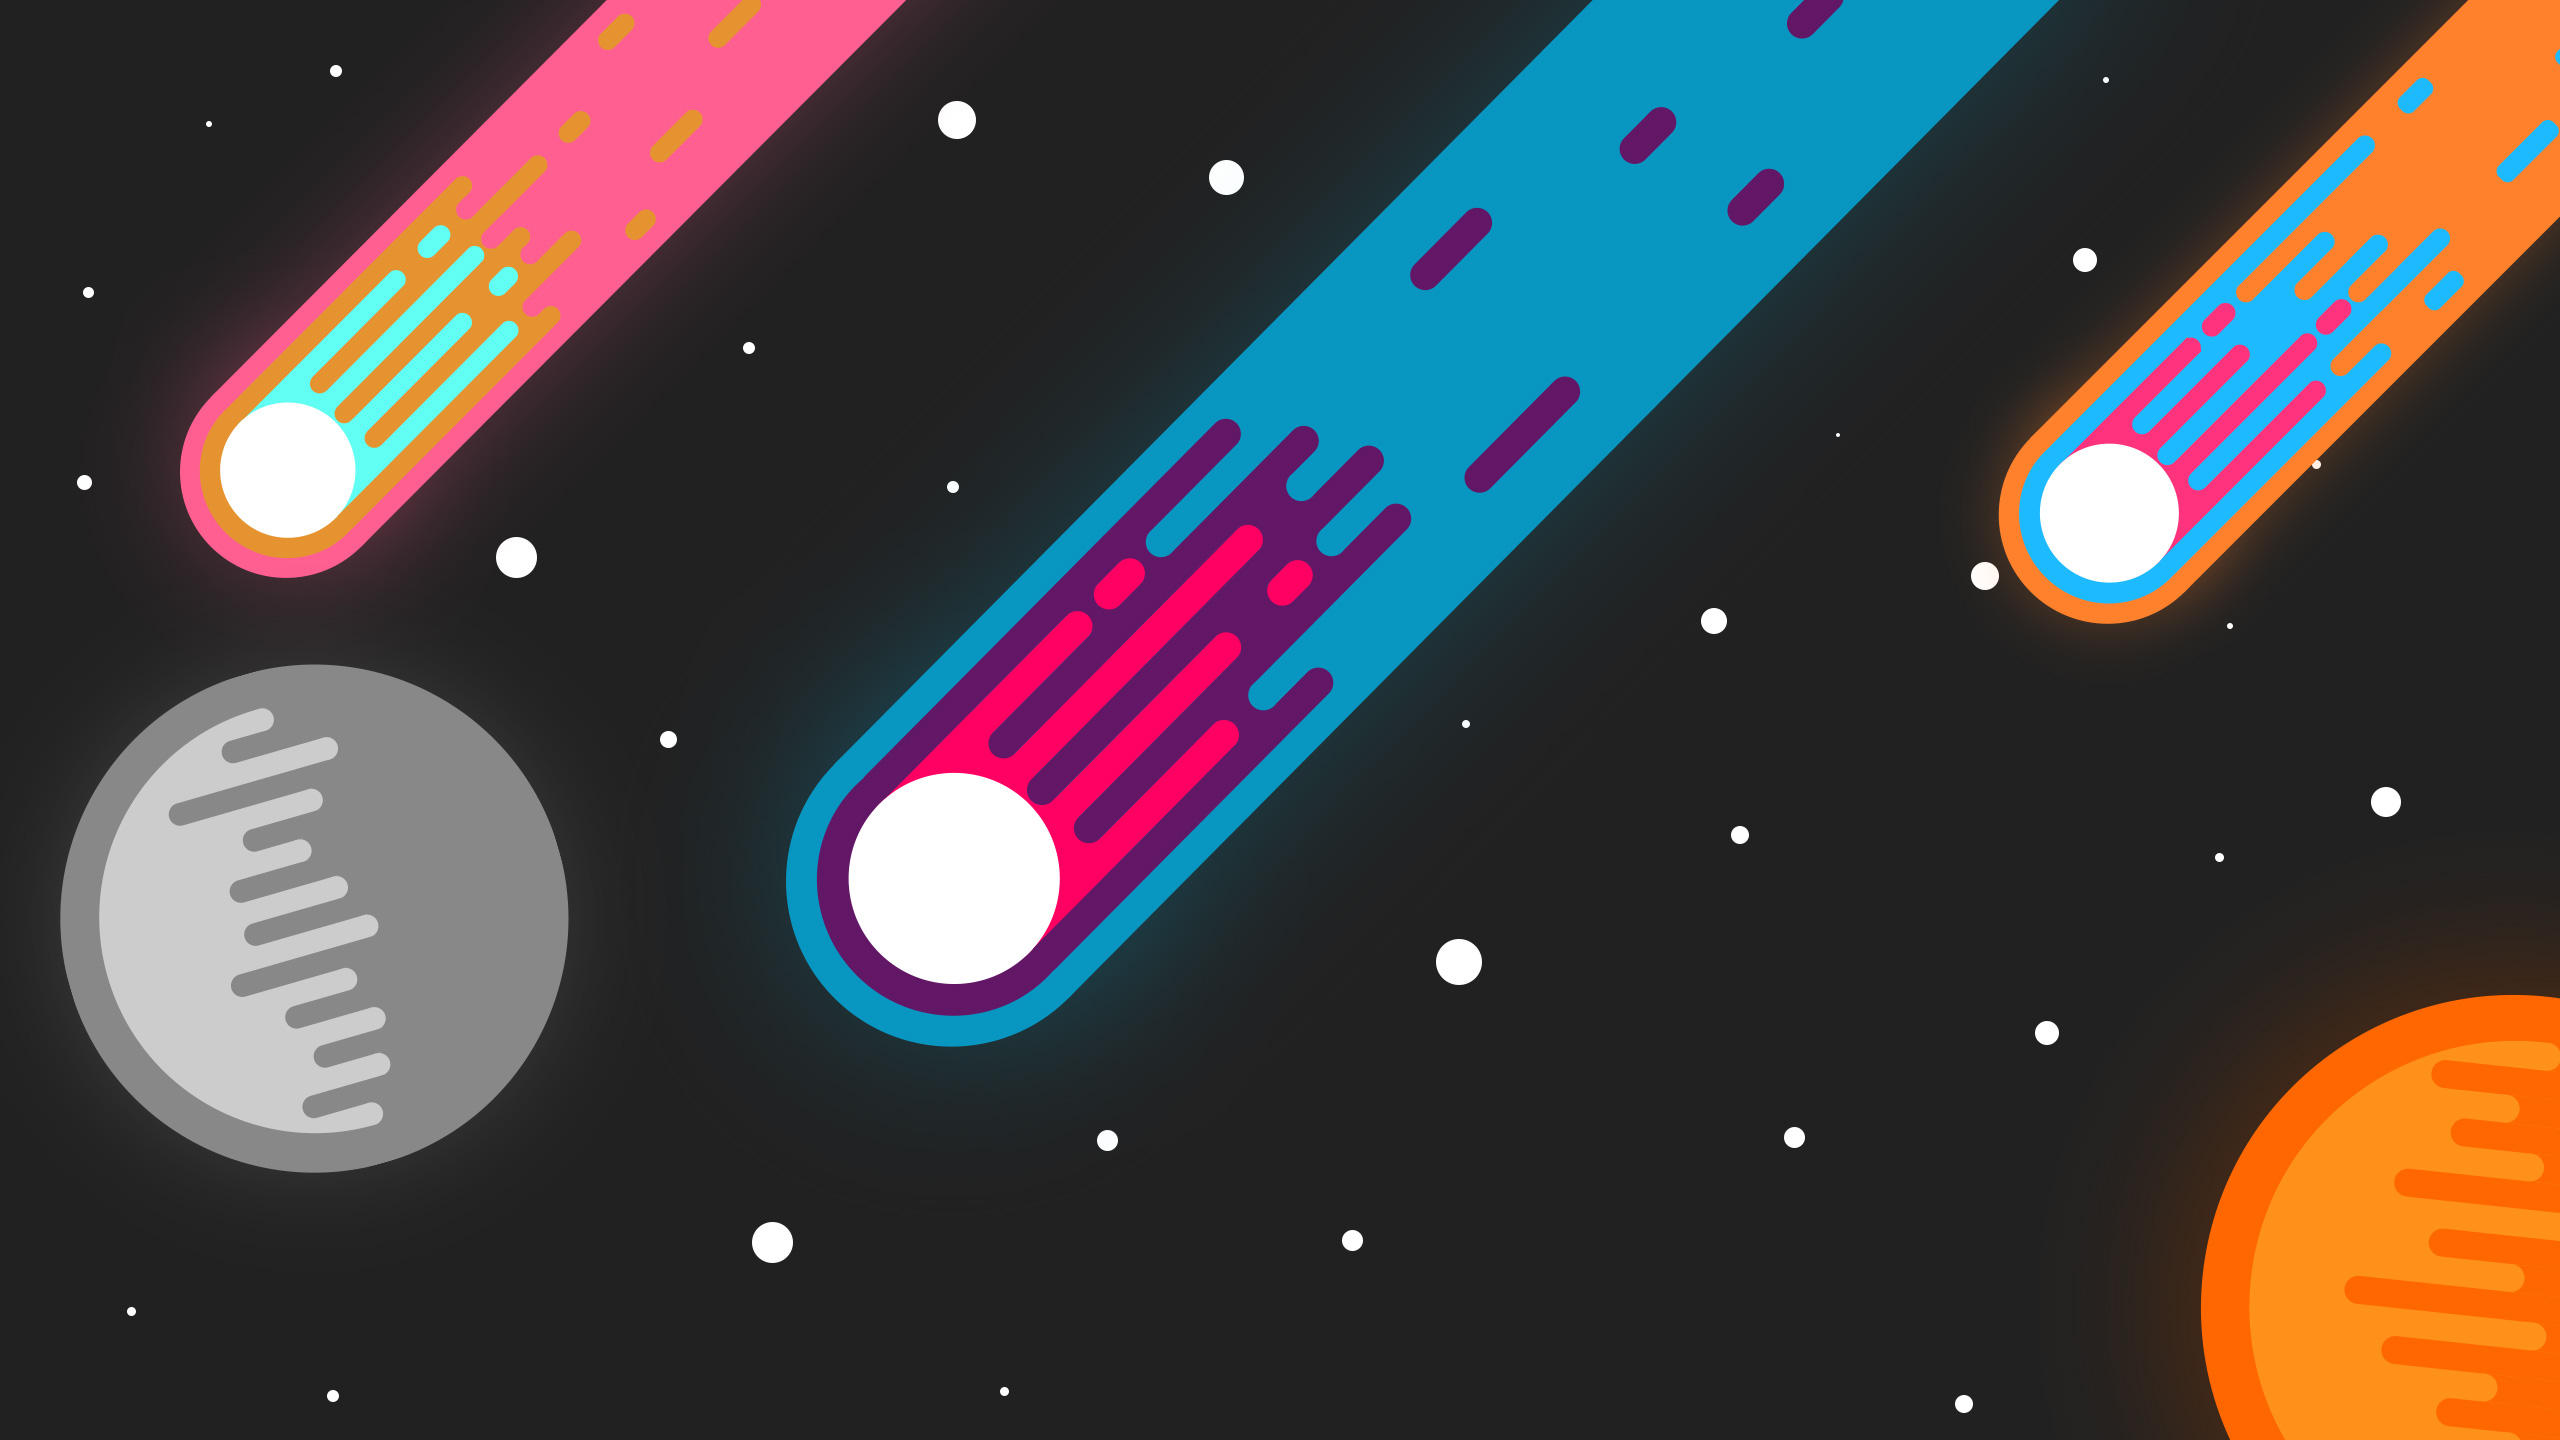  Minimalist  Space  HD Artist 4k Wallpapers Images 